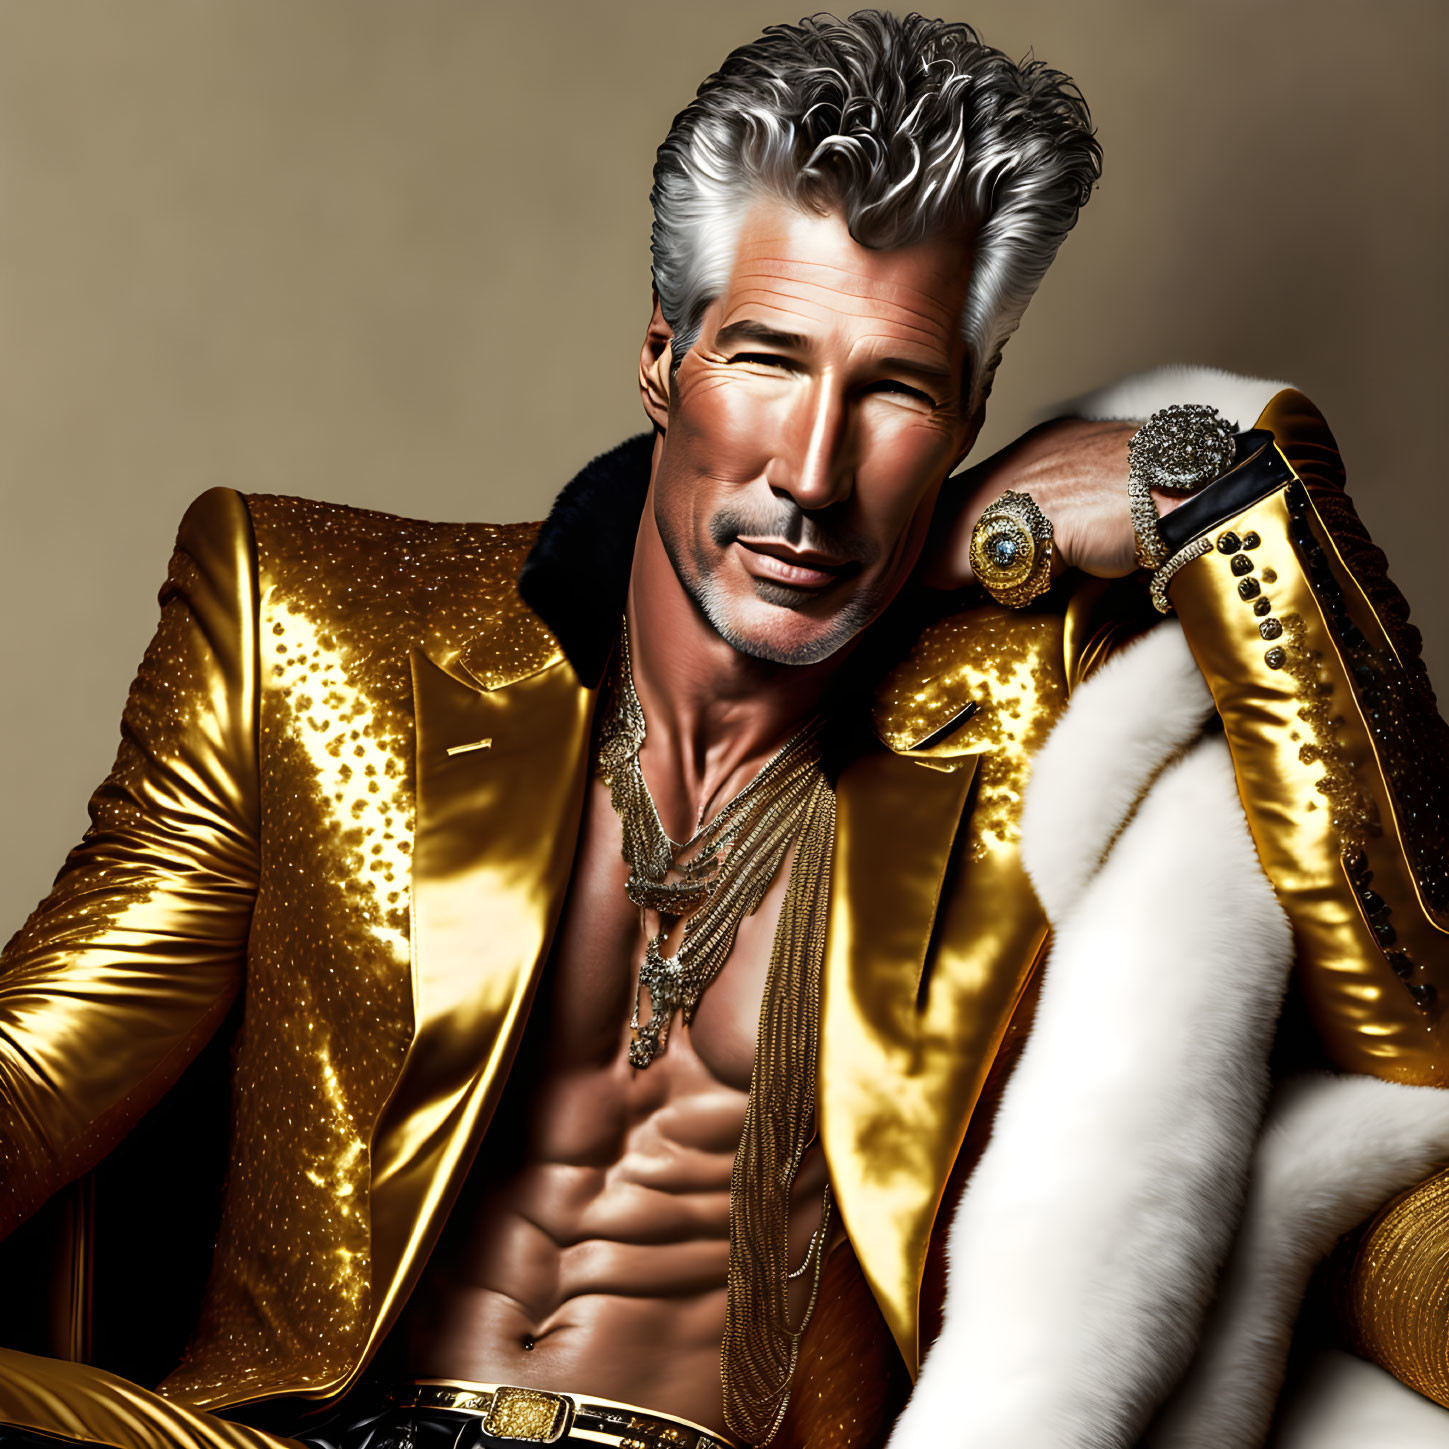 Stylized image of a man with silver hair, gold sequin jacket, heavy gold jewelry,